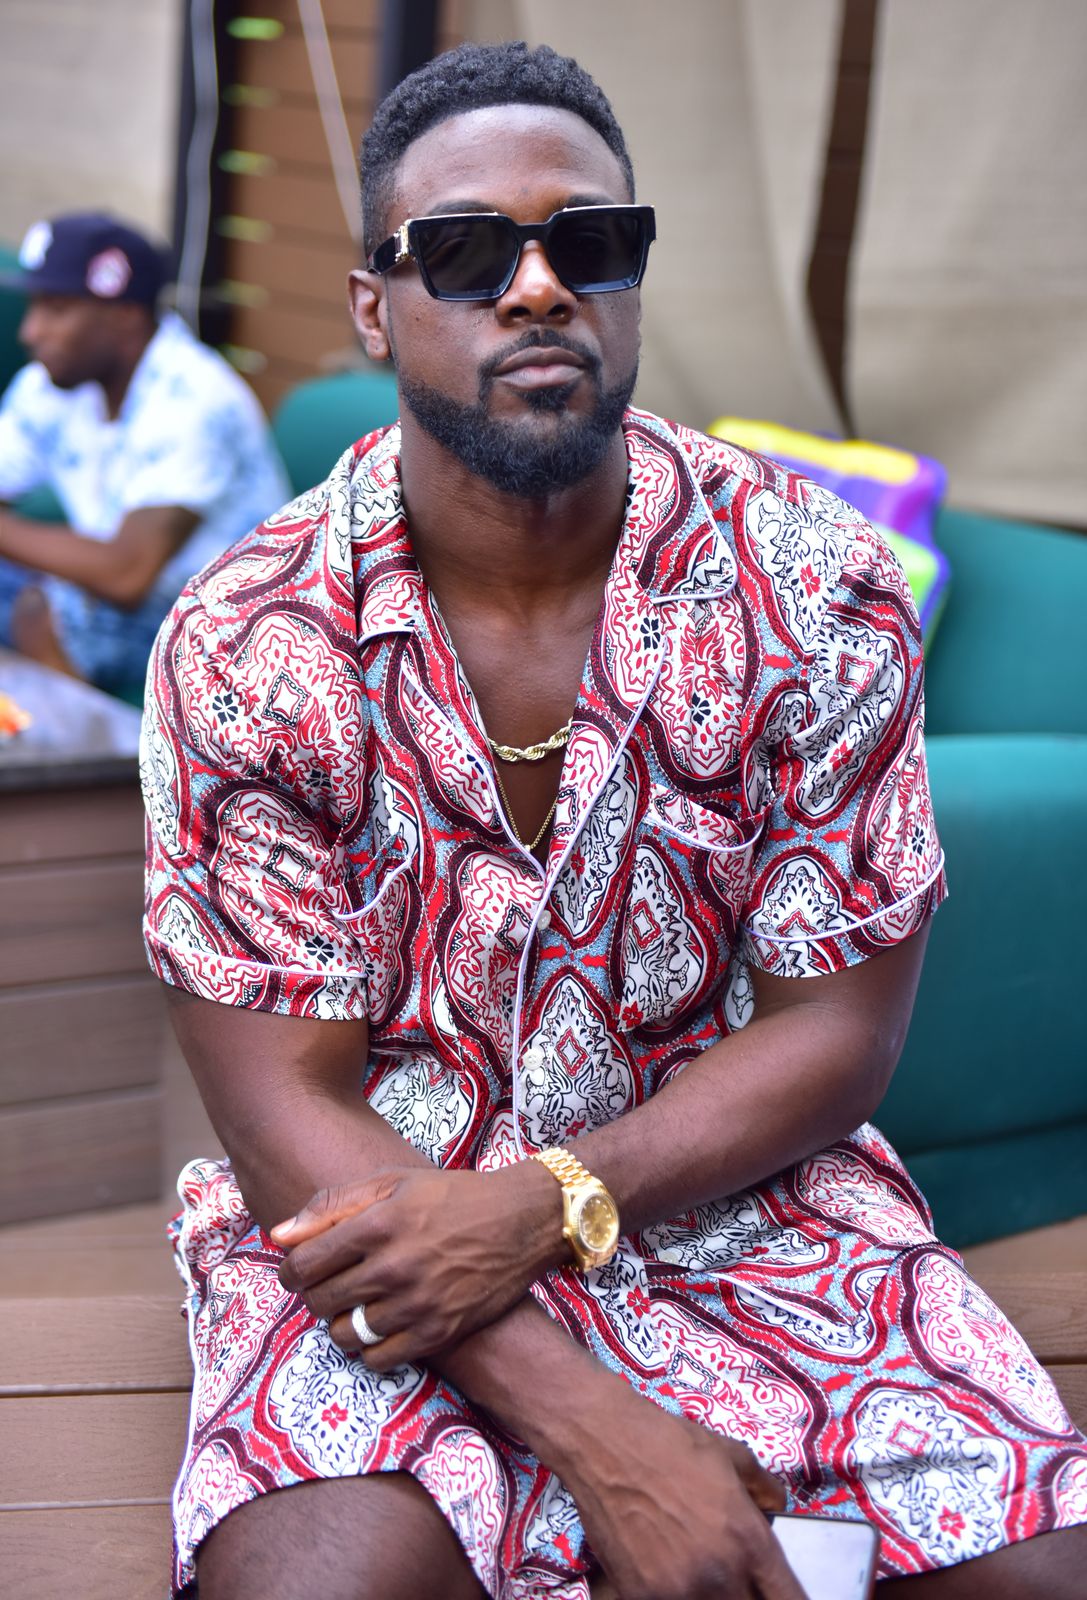 Lance Gross at Official Luda Day Party at Elleven45 in Atlanta on August 31, 2019. | Photo: Getty Images